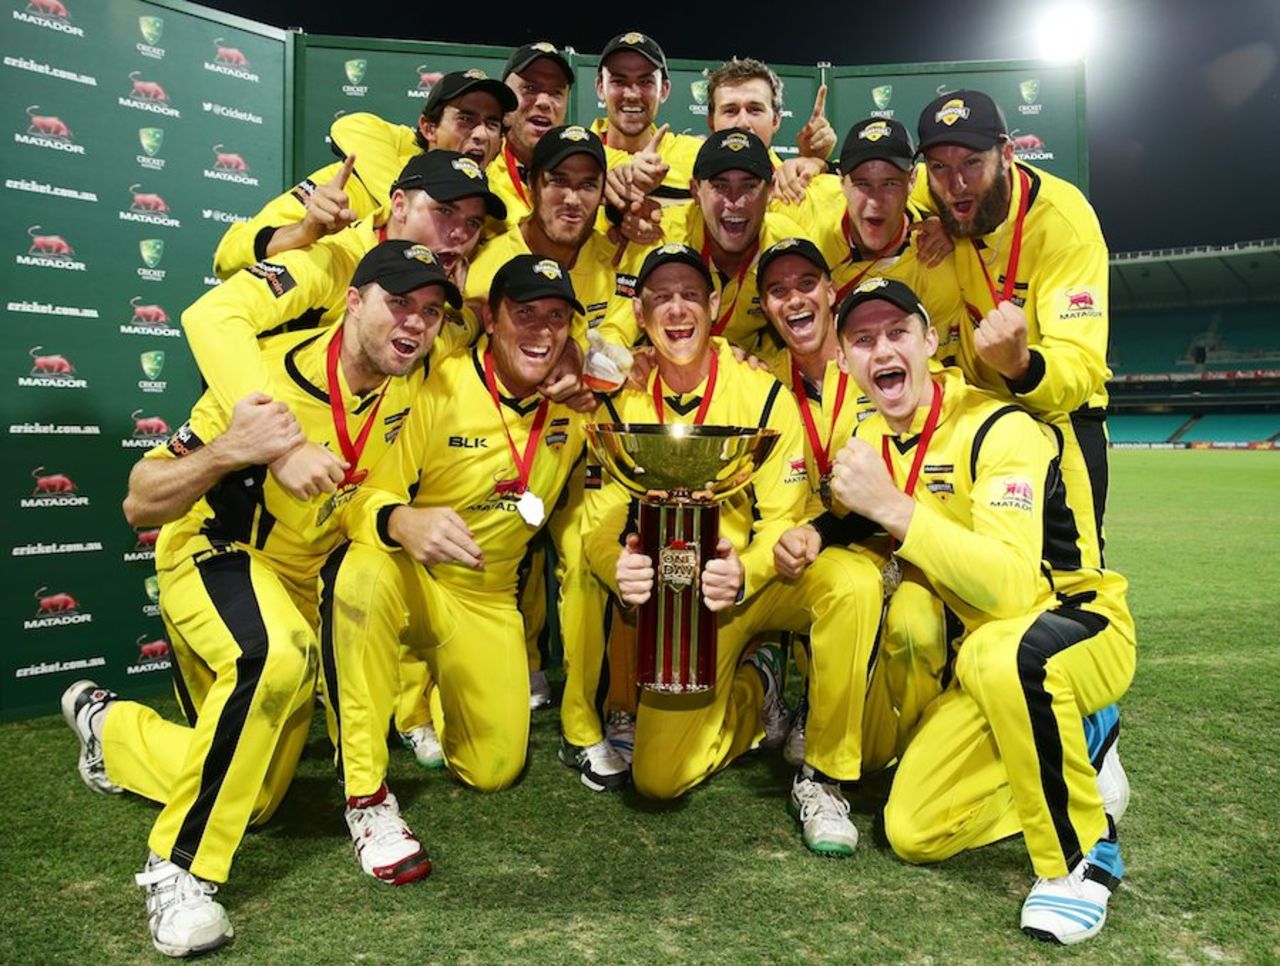 The victorious Western Australia team with the trophy, New South Wales v Western Australia, Matador BBQ one-day cup, final, SCG, October 26, 2014